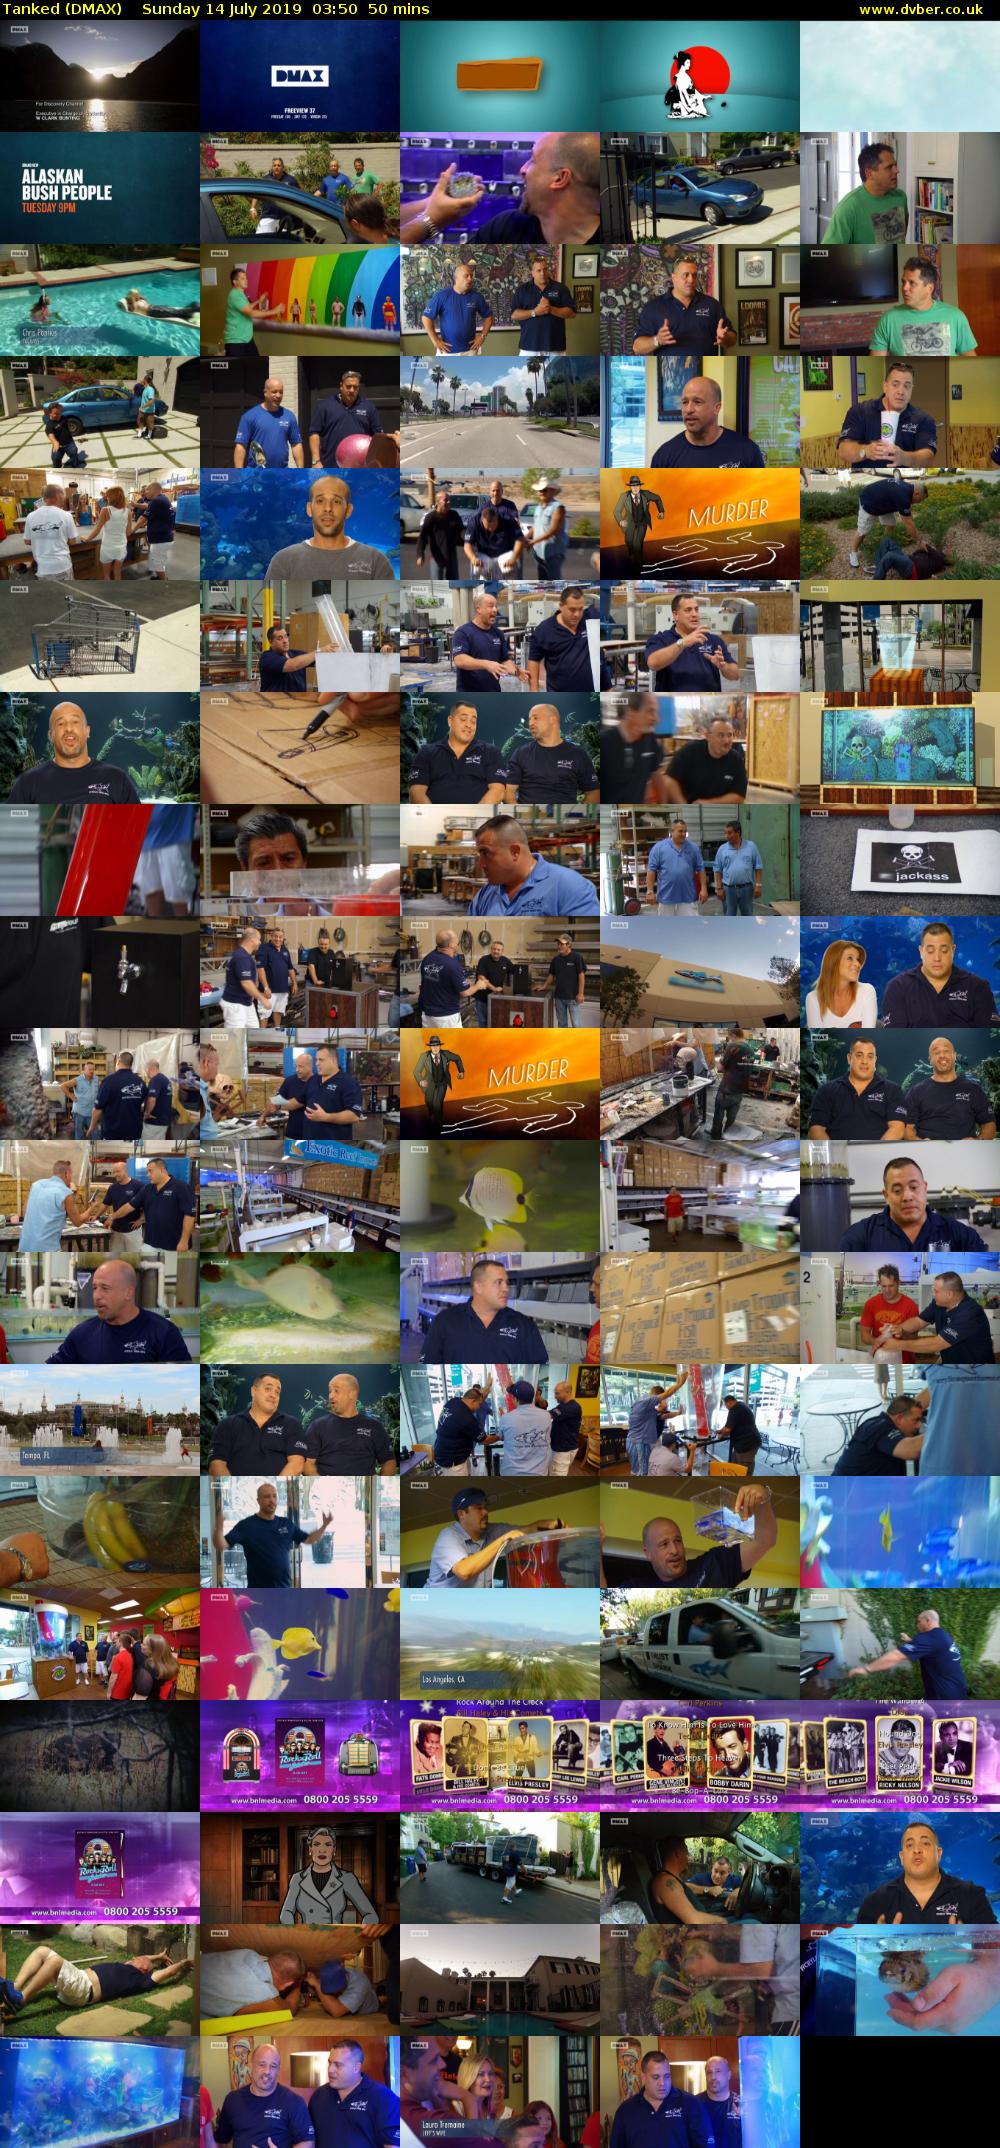 Tanked (DMAX) Sunday 14 July 2019 03:50 - 04:40